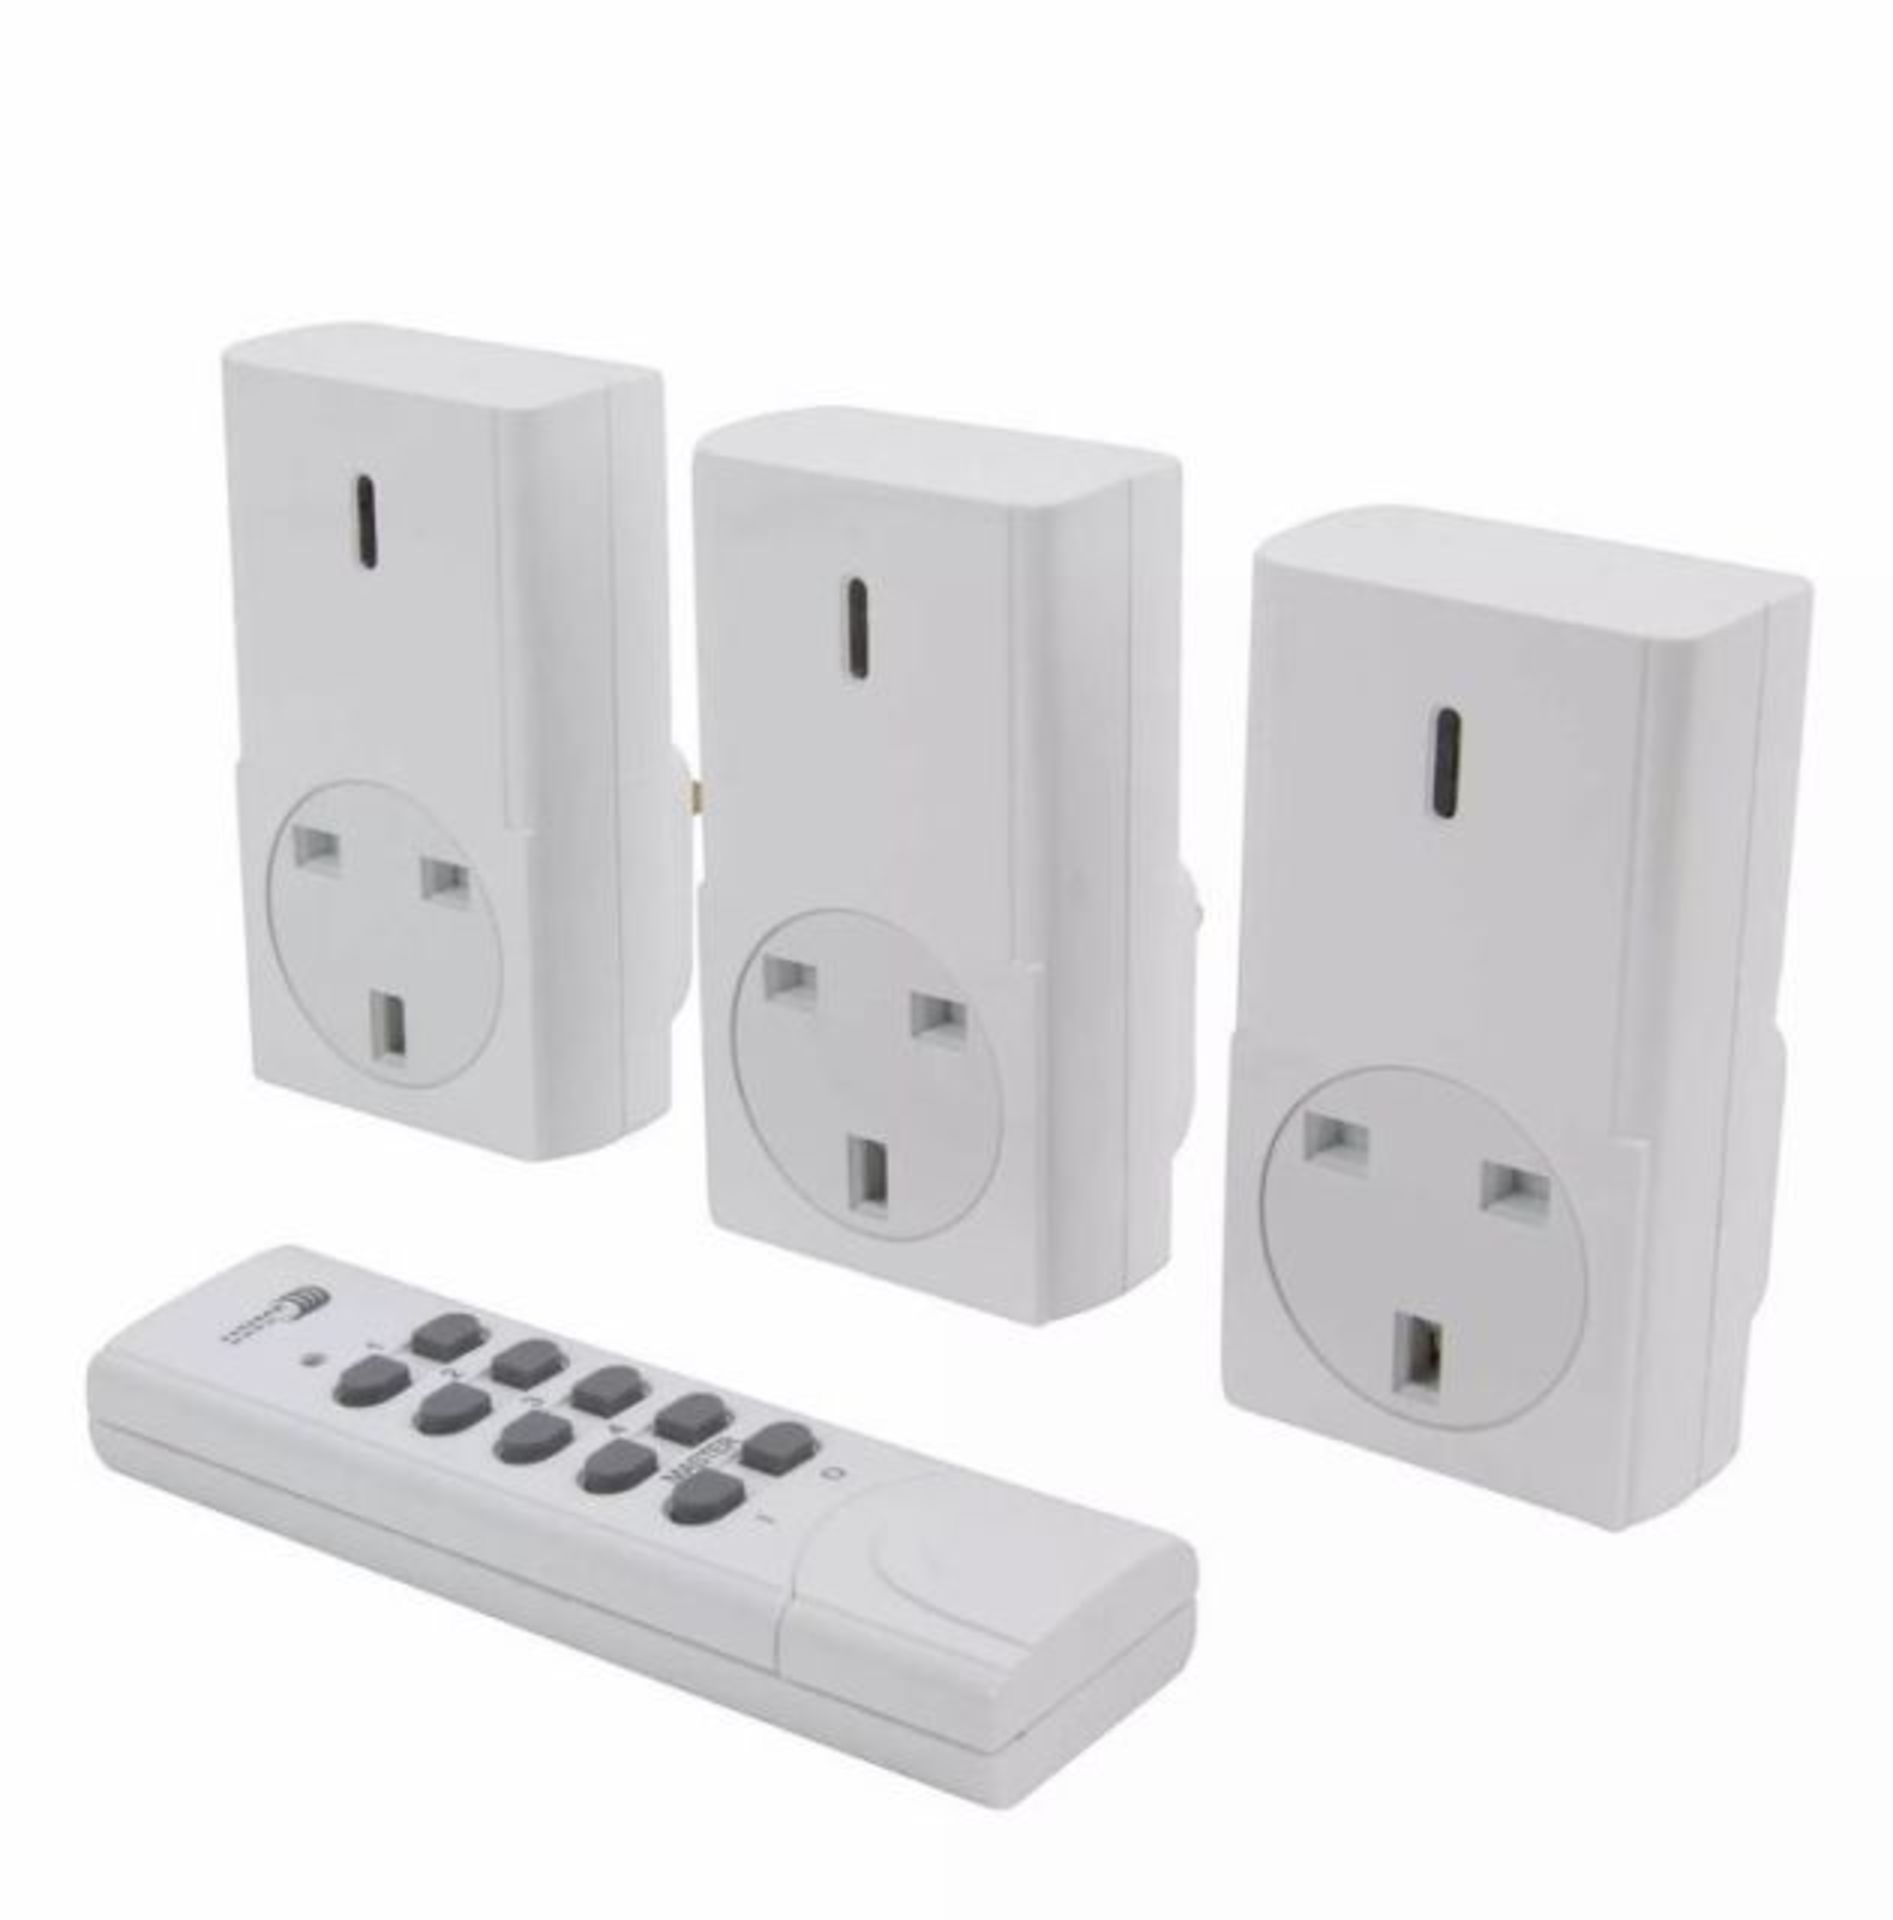 V *TRADE QTY* Brand New Indoor Remote Control Sockets with Four Receivers and Programmable remote